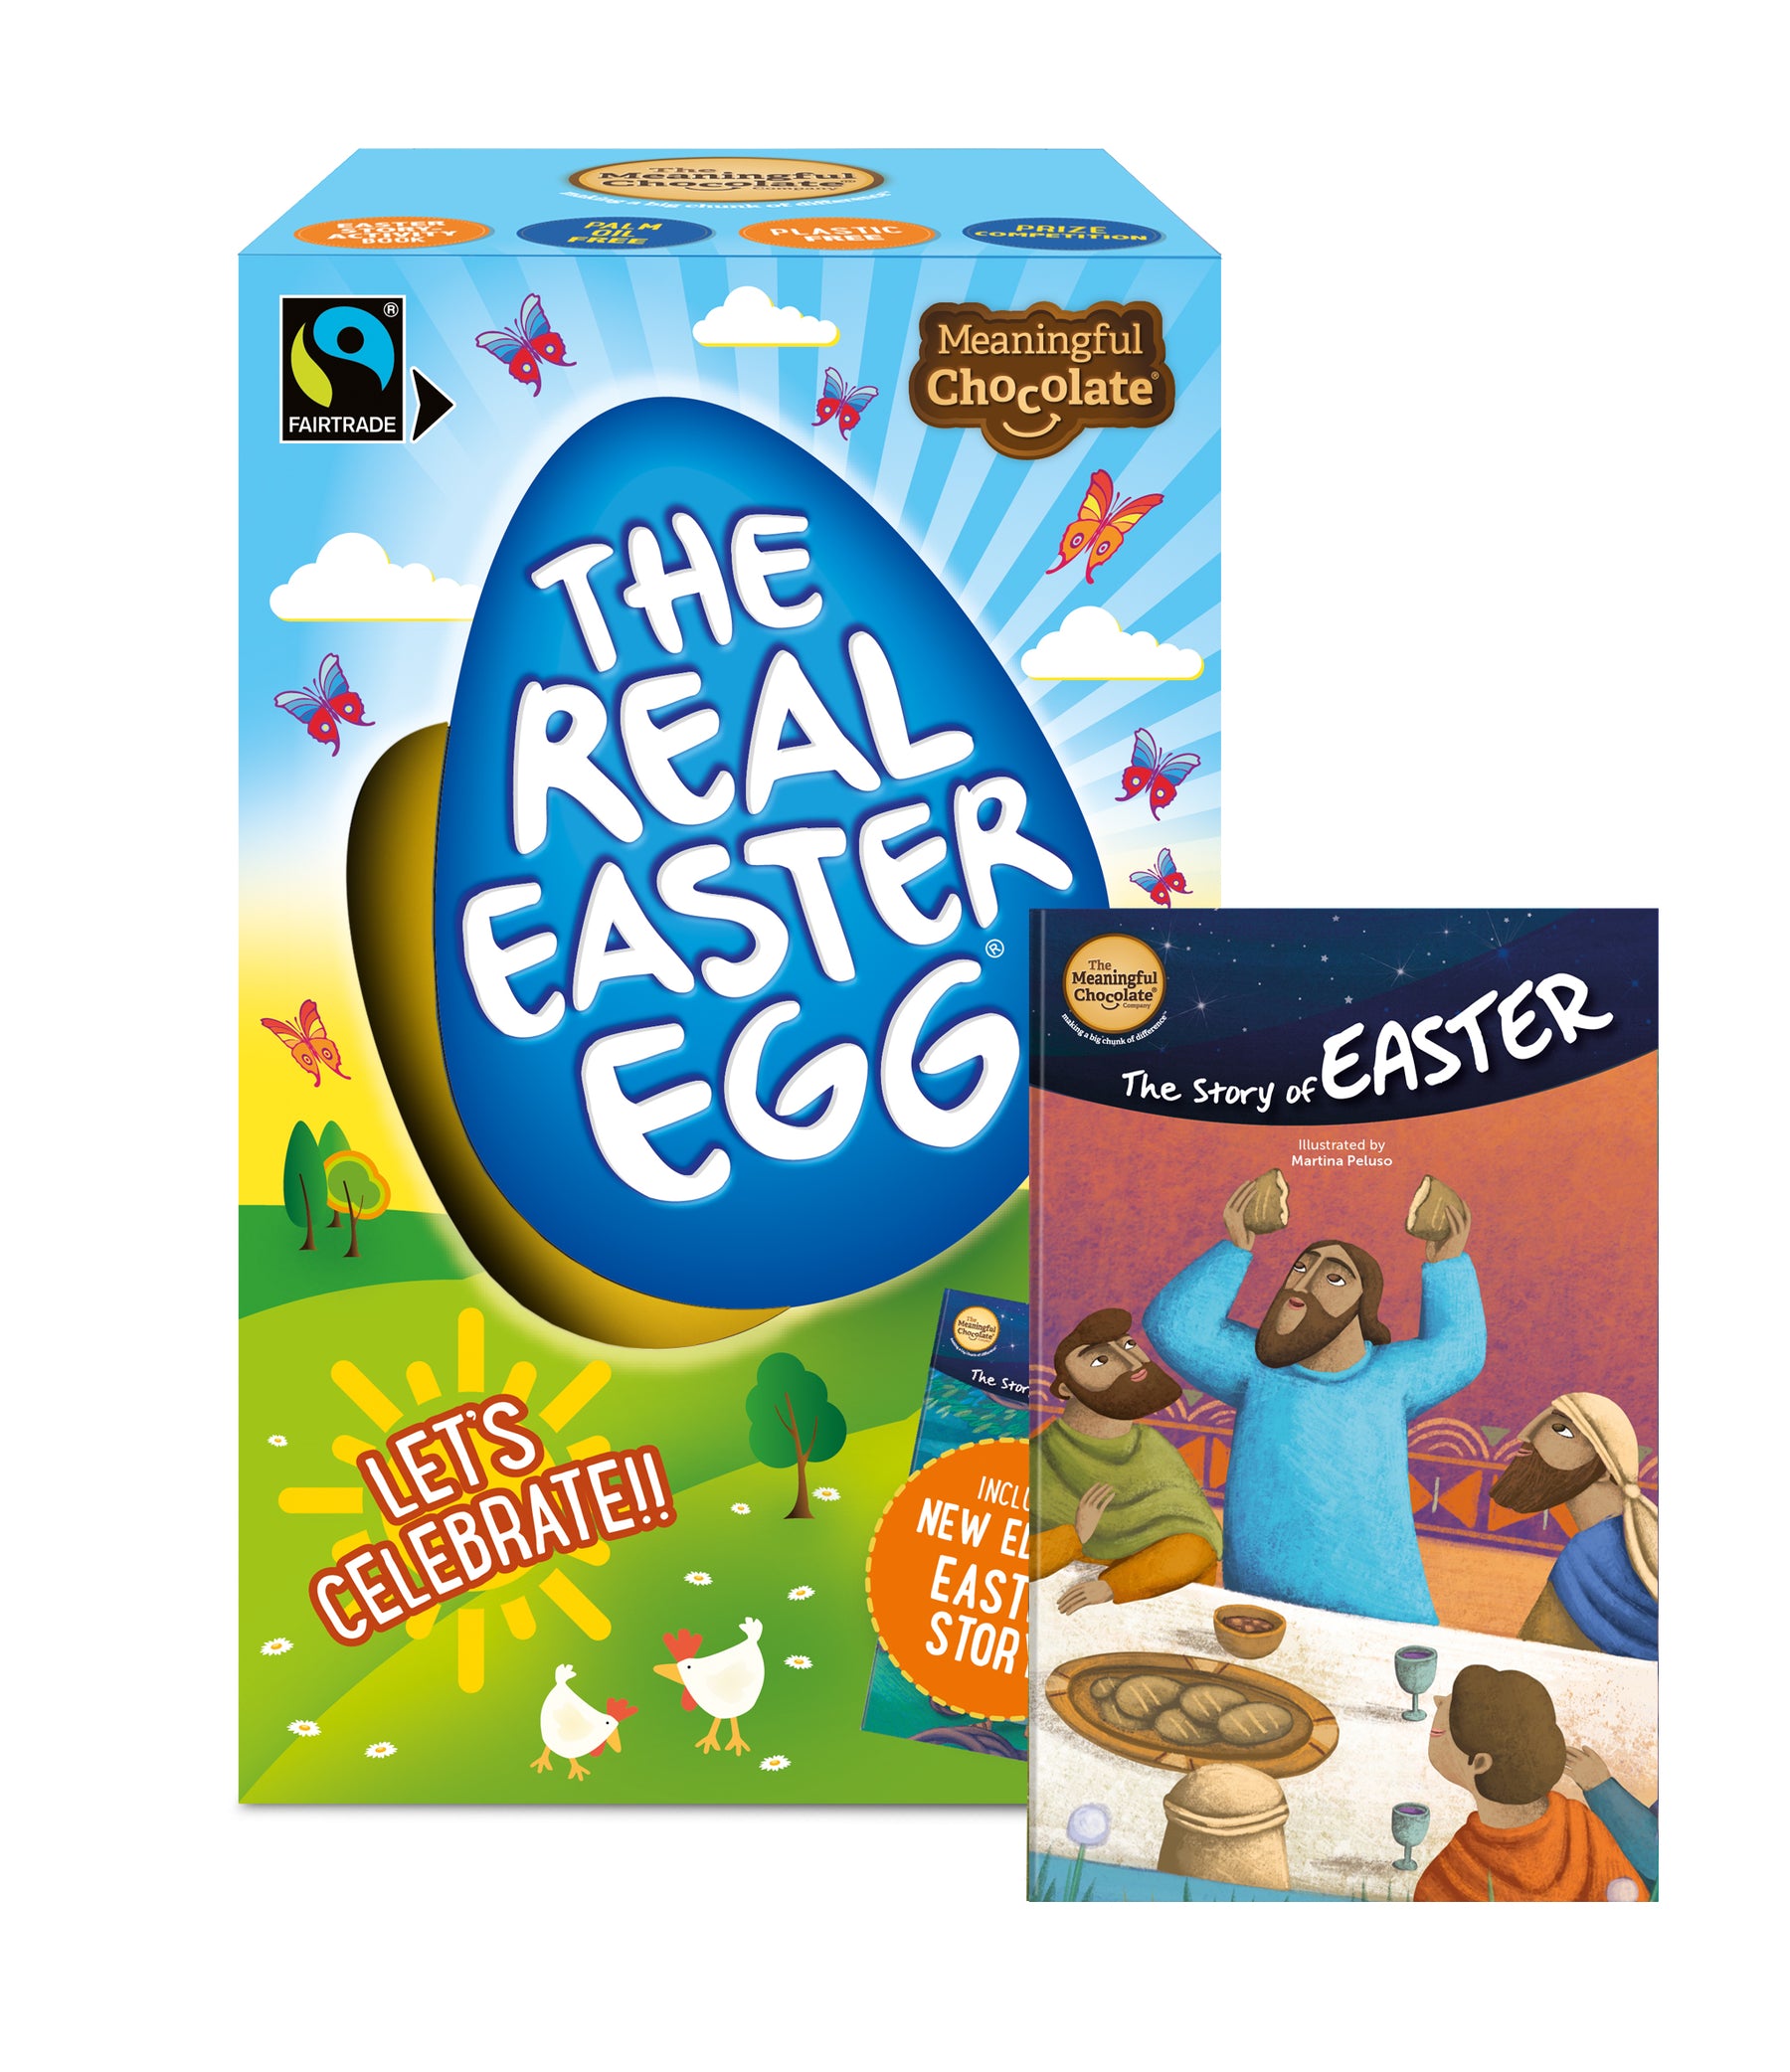 Real Easter Eggs launched for 2023